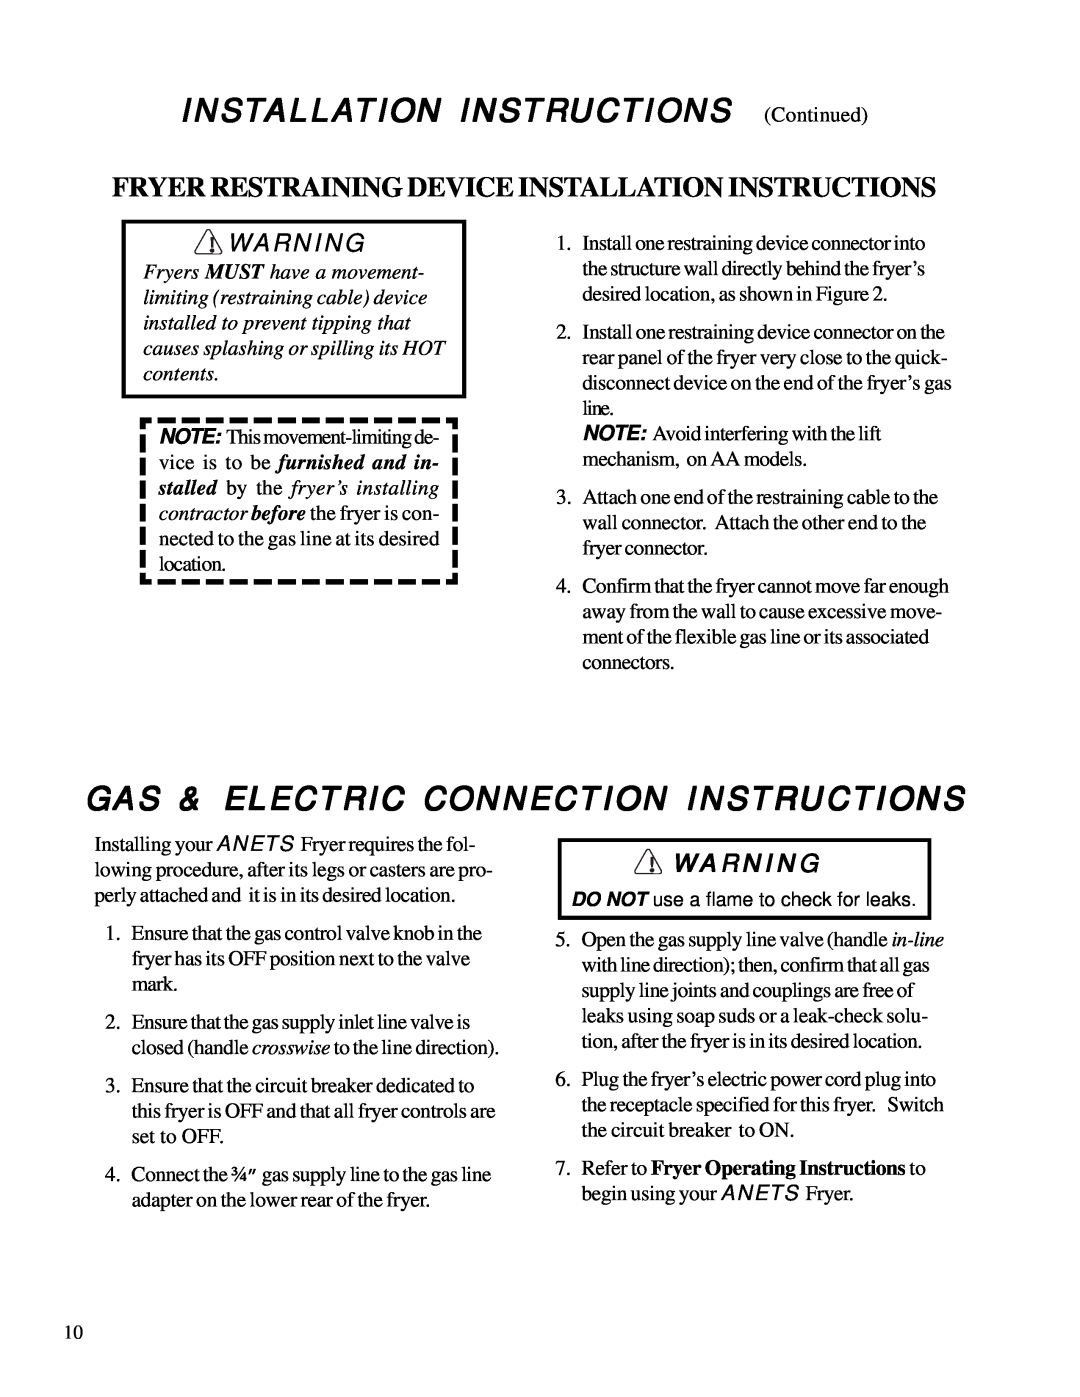 Anetsberger Brothers MX-7A, MX-7E, MX-14E Gas & Electric Connection Instructions, INSTALLATION INSTRUCTIONS Continued 